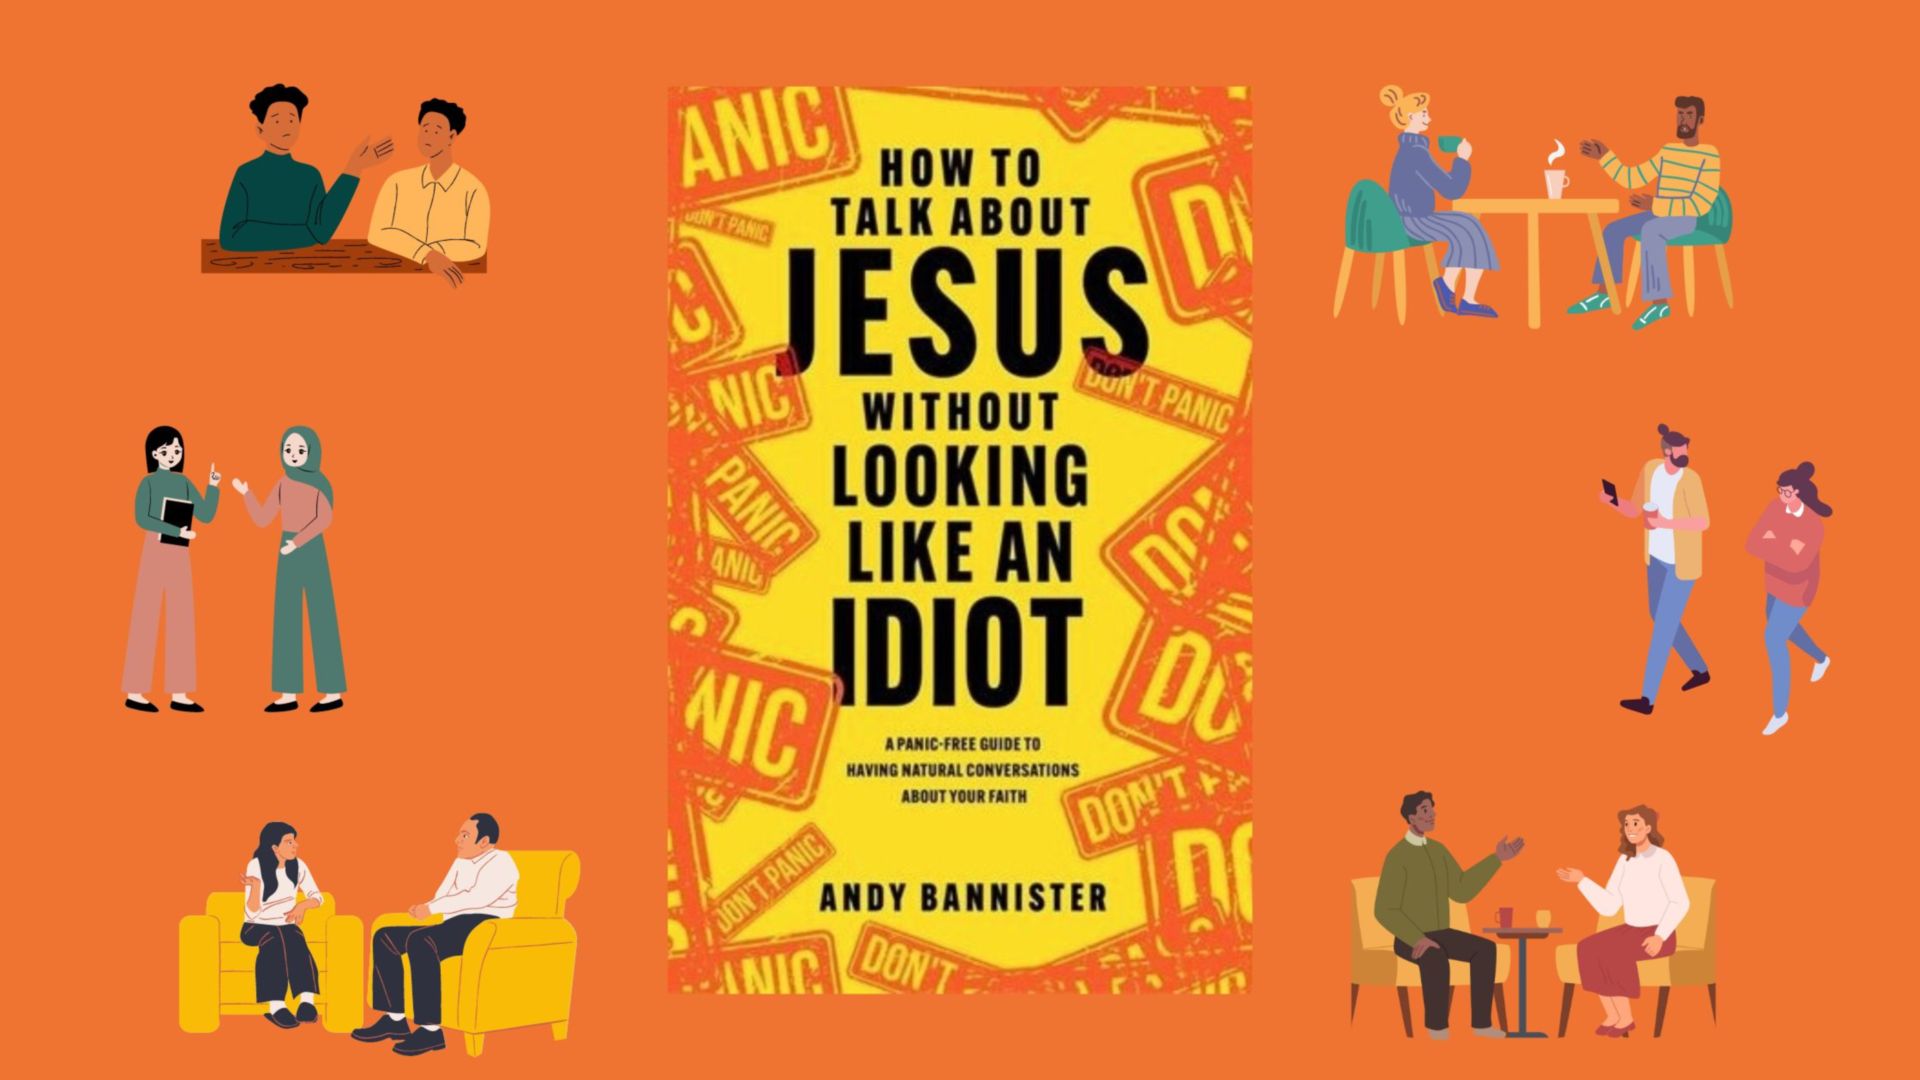 A review of Andy Bannister's book 'How to Talk About Jesus Without Looking Like An Idiot'